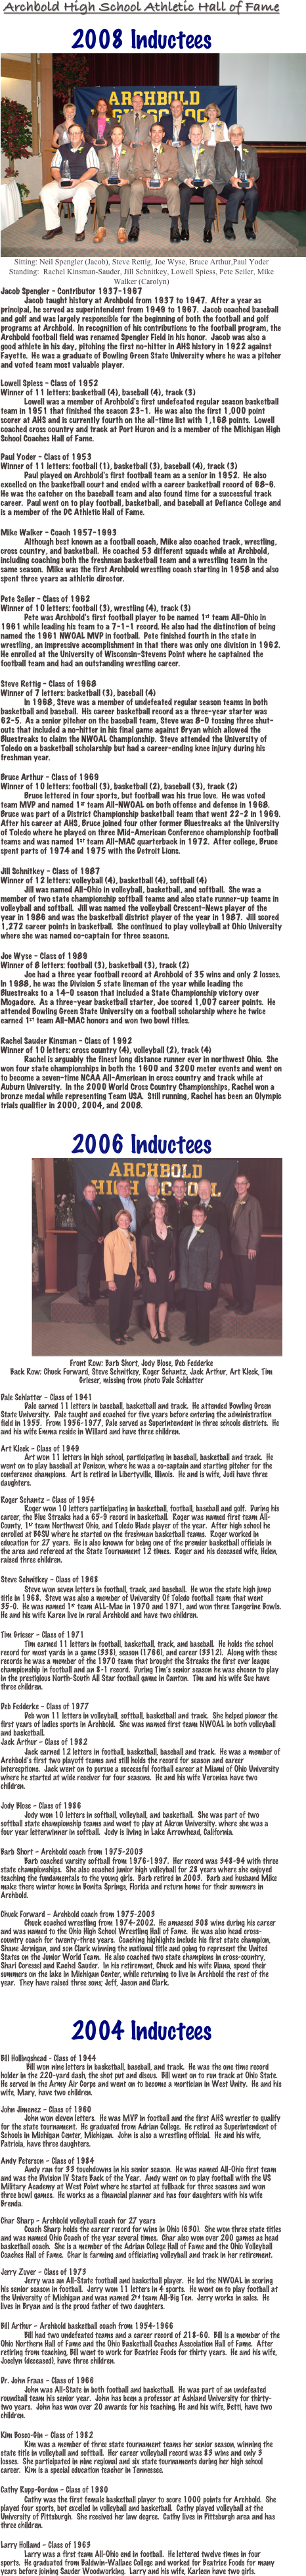 Archbold High School Athletic Hall of Fame

2008 Inductees
￼
Sitting: Neil Spengler (Jacob), Steve Rettig, Joe Wyse, Bruce Arthur,Paul Yoder
Standing:  Rachel Kinsman-Sauder, Jill Schnitkey, Lowell Spiess, Pete Seiler, Mike Walker (Carolyn)
Jacob Spengler - Contributor 1937-1967
Jacob taught history at Archbold from 1937 to 1947.  After a year as principal, he served as superintendent from 1949 to 1967.  Jacob coached baseball and golf and was largely responsible for the beginning of both the football and golf programs at Archbold.  In recognition of his contributions to the football program, the Archbold football field was renamed Spengler Field in his honor.  Jacob was also a good athlete in his day, pitching the first no-hitter in AHS history in 1922 against Fayette.  He was a graduate of Bowling Green State University where he was a pitcher and voted team most valuable player.

Lowell Spiess - Class of 1952
Winner of 11 letters: basketball (4), baseball (4), track (3)
Lowell was a member of Archbold’s first undefeated regular season basketball team in 1951 that finished the season 23-1.  He was also the first 1,000 point scorer at AHS and is currently fourth on the all-time list with 1,168 points.  Lowell coached cross country and track at Port Huron and is a member of the Michigan High School Coaches Hall of Fame.

Paul Yoder - Class of 1953
Winner of 11 letters: football (1), basketball (3), baseball (4), track (3)
	Paul played on Archbold’s first football team as a senior in 1952.  He also excelled on the basketball court and ended with a career basketball record of 68-6.  He was the catcher on the baseball team and also found time for a successful track career.  Paul went on to play football, basketball, and baseball at Defiance College and is a member of the DC Athletic Hall of Fame.

Mike Walker - Coach 1957-1993
	Although best known as a football coach, Mike also coached track, wrestling, cross country, and basketball.  He coached 53 different squads while at Archbold, including coaching both the freshman basketball team and a wrestling team in the same season.  Mike was the first Archbold wrestling coach starting in 1958 and also spent three years as athletic director.

Pete Seiler - Class of 1962
Winner of 10 letters: football (3), wrestling (4), track (3)
	Pete was Archbold’s first football player to be named 1st team All-Ohio in 1961 while leading his team to a 7-1-1 record. He also had the distinction of being named the 1961 NWOAL MVP in football.  Pete finished fourth in the state in wrestling, an impressive accomplishment in that there was only one division in 1962.  He enrolled at the University of Wisconsin-Stevens Point where he captained the football team and had an outstanding wrestling career.

Steve Rettig - Class of 1968
Winner of 7 letters: basketball (3), baseball (4)
	In 1968, Steve was a member of undefeated regular season teams in both basketball and baseball.  His career basketball record as a three-year starter was 62-5.  As a senior pitcher on the baseball team, Steve was 8-0 tossing three shut-outs that included a no-hitter in his final game against Bryan which allowed the Bluestreaks to claim the NWOAL Championship.  Steve attended the University of Toledo on a basketball scholarship but had a career-ending knee injury during his freshman year.

Bruce Arthur - Class of 1969
Winner of 10 letters: football (3), basketball (2), baseball (3), track (2)
	Bruce lettered in four sports, but football was his true love.  He was voted team MVP and named 1st team All-NWOAL on both offense and defense in 1968.  Bruce was part of a District Championship basketball team that went 22-2 in 1969.  After his career at AHS, Bruce joined four other former Bluestreaks at the University of Toledo where he played on three Mid-American Conference championship football teams and was named 1st team All-MAC quarterback in 1972.  After college, Bruce spent parts of 1974 and 1975 with the Detroit Lions.

Jill Schnitkey - Class of 1987
Winner of 12 letters: volleyball (4), basketball (4), softball (4)
	Jill was named All-Ohio in volleyball, basketball, and softball.  She was a member of two state championship softball teams and also state runner-up teams in volleyball and softball.  Jill was named the volleyball Crescent-News player of the year in 1986 and was the basketball district player of the year in 1987.  Jill scored 1,272 career points in basketball.  She continued to play volleyball at Ohio University where she was named co-captain for three seasons.

Joe Wyse - Class of 1989
Winner of 8 letters: football (3), basketball (3), track (2)
	Joe had a three year football record at Archbold of 35 wins and only 2 losses.  In 1988, he was the Division 5 state lineman of the year while leading the Bluestreaks to a 14-0 season that included a State Championship victory over Mogadore.  As a three-year basketball starter, Joe scored 1,007 career points.  He attended Bowling Green State University on a football scholarship where he twice earned 1st team All-MAC honors and won two bowl titles.

Rachel Sauder Kinsman - Class of 1992
Winner of 10 letters: cross country (4), volleyball (2), track (4)
	Rachel is arguably the finest long distance runner ever in northwest Ohio.  She won four state championships in both the 1600 and 3200 meter events and went on to become a seven-time NCAA All-American in cross country and track while at Auburn University.  In the 2000 World Cross Country Championships, Rachel won a bronze medal while representing Team USA.  Still running, Rachel has been an Olympic trials qualifier in 2000, 2004, and 2008.


2006 Inductees
￼
Front Row: Barb Short, Jody Blose, Deb Fedderke
Back Row: Chuck Forward, Steve Schnitkey, Roger Schantz, Jack Arthur, Art Kleck, Tim Grieser, missing from photo Dale Schlatter

Dale Schlatter – Class of 1941
	Dale earned 11 letters in baseball, basketball and track.  He attended Bowling Green State University.  Dale taught and coached for five years before entering the administration field in 1955.  From 1956-1977, Dale served as Superintendent in three schools districts.  He and his wife Emma reside in Willard and have three children.

Art Kleck – Class of 1949
	Art won 11 letters in high school, participating in baseball, basketball and track.  He went on to play baseball at Denison, where he was a co-captain and starting pitcher for the conference champions.  Art is retired in Libertyville, Illinois.  He and is wife, Judi have three daughters.

Roger Schantz – Class of 1954
	Roger won 10 letters participating in basketball, football, baseball and golf.  During his career, the Blue Streaks had a 65-9 record in basketball.  Roger was named first team All-County, 1st team Northwest Ohio, and Toledo Blade player of the year.  After high school he enrolled at BGSU where he started on the freshman basketball teams.  Roger worked in education for 27 years.  He is also known for being one of the premier basketball officials in the area and refereed at the State Tournament 12 times.  Roger and his deceased wife, Helen, raised three children.

Steve Schnitkey – Class of 1968
	Steve won seven letters in football, track, and baseball.  He won the state high jump title in 1968.  Steve was also a member of University Of Toledo football team that went 35-0.  He was named 1st team ALL-Mac in 1970 and 1971, and won three Tangerine Bowls.  He and his wife Karen live in rural Archbold and have two children.

Tim Grieser – Class of 1971
	Tim earned 11 letters in football, basketball, track, and baseball.  He holds the school record for most yards in a game (338), season (1766), and career (3312).  Along with these records he was a member of the 1970 team that brought the Streaks the first ever league championship in football and an 8-1 record.  During Tim’s senior season he was chosen to play in the prestigious North-South All Star football game in Canton.  Tim and his wife Sue have three children.

Deb Fedderke – Class of 1977
	Deb won 11 letters in volleyball, softball, basketball and track.  She helped pioneer the first years of ladies sports in Archbold.  She was named first team NWOAL in both volleyball and basketball.  
Jack Arthur – Class of 1982
	Jack earned 12 letters in football, basketball, baseball and track.  He was a member of Archbold’s first two playoff teams and still holds the record for season and career interceptions.  Jack went on to pursue a successful football career at Miami of Ohio University where he started at wide receiver for four seasons.  He and his wife Veronica have two children.

Jody Blose – Class of 1986
	Jody won 10 letters in softball, volleyball, and basketball.  She was part of two softball state championship teams and went to play at Akron University. where she was a four year letterwinner in softball.  Jody is living in Lake Arrowhead, California. 

Barb Short – Archbold coach from 1975-2003
	Barb coached varsity softball from 1976-1997.  Her record was 348-94 with three state championships.  She also coached junior high volleyball for 28 years where she enjoyed teaching the fundamentals to the young girls.  Barb retired in 2003.  Barb and husband Mike make there winter home in Bonita Springs, Florida and return home for their summers in Archbold.

Chuck Forward – Archbold coach from 1975-2003
	Chuck coached wrestling from 1974-2002.  He amassed 308 wins during his career and was named to the Ohio High School Wrestling Hall of Fame.  He was also head cross-country coach for twenty-three years.  Coaching highlights include his first state champion, Shane Jernigan, and son Clark winning the national title and going to represent the United States on the Junior World Team.  He also coached two state champions in cross-country, Shari Coressel and Rachel Sauder.  In his retirement, Chuck and his wife Diana, spend their summers on the lake in Michigan Center, while returning to live in Archbold the rest of the year.  They have raised three sons; Jeff, Jason and Clark.

 

2004 Inductees

Bill Hollingshead - Class of 1944
 Bill won nine letters in basketball, baseball, and track.  He was the one time record holder in the 220-yard dash, the shot put and discus.  Bill went on to run track at Ohio State.  He served in the Army Air Corps and went on to become a mortician in West Unity.  He and his wife, Mary, have two children.

John Jimenez – Class of 1960				
	John won eleven letters.  He was MVP in football and the first AHS wrestler to qualify for the state tournament.  He graduated from Adrian College.  He retired as Superintendent of Schools in Michigan Center, Michigan.  John is also a wrestling official.  He and his wife, Patricia, have three daughters.

Andy Peterson – Class of 1984
	Andy ran for 33 touchdowns in his senior season.  He was named All-Ohio first team and was the Division IV State Back of the Year.  Andy went on to play football with the US Military Academy at West Point where he started at fullback for three seasons and won three bowl games.  He works as a financial planner and has four daughters with his wife Brenda.

Char Sharp – Archbold volleyball coach for 27 years
	Coach Sharp holds the career record for wins in Ohio (630).  She won three state titles and was named Ohio Coach of the year several times.  Char also won over 200 games as head basketball coach.  She is a member of the Adrian College Hall of Fame and the Ohio Volleyball Coaches Hall of Fame.  Char is farming and officiating volleyball and track in her retirement.

Jerry Zuver – Class of 1973
	Jerry was an All-State football and basketball player.  He led the NWOAL in scoring his senior season in football.  Jerry won 11 letters in 4 sports.  He went on to play football at the University of Michigan and was named 2nd team All-Big Ten.  Jerry works in sales.  He lives in Bryan and is the proud father of two daughters.

Bill Arthur – Archbold basketball coach from 1954-1966
	Bill had two undefeated teams and a career record of 218-60.  Bill is a member of the Ohio Northern Hall of Fame and the Ohio Basketball Coaches Association Hall of Fame.  After retiring from teaching, Bill went to work for Beatrice Foods for thirty years.  He and his wife, Jocelyn (deceased), have three children.

Dr. John Fraas – Class of 1966
	John was All-State in both football and basketball.  He was part of an undefeated roundball team his senior year.  John has been a professor at Ashland University for thirty-two years.  John has won over 20 awards for his teaching. He and his wife, Betti, have two children.

Kim Bosco-Gin – Class of 1982
	Kim was a member of three state tournament teams her senior season, winning the state title in volleyball and softball.  Her career volleyball record was 83 wins and only 3 losses.  She participated in nine regional and six state tournaments during her high school career.  Kim is a special education teacher in Tennessee.  

Cathy Rupp-Gordon – Class of 1980
	Cathy was the first female basketball player to score 1000 points for Archbold.  She played four sports, but excelled in volleyball and basketball.  Cathy played volleyball at the University of Pittsburgh.  She received her law degree.  Cathy lives in Pittsburgh area and has three children.

Larry Holland – Class of 1963
	Larry was a first team All-Ohio end in football.  He lettered twelve times in four sports.  He graduated from Baldwin-Wallace College and worked for Beatrice Foods for many years before joining Sauder Woodworking.  Larry and his wife, Karleen have two girls.


